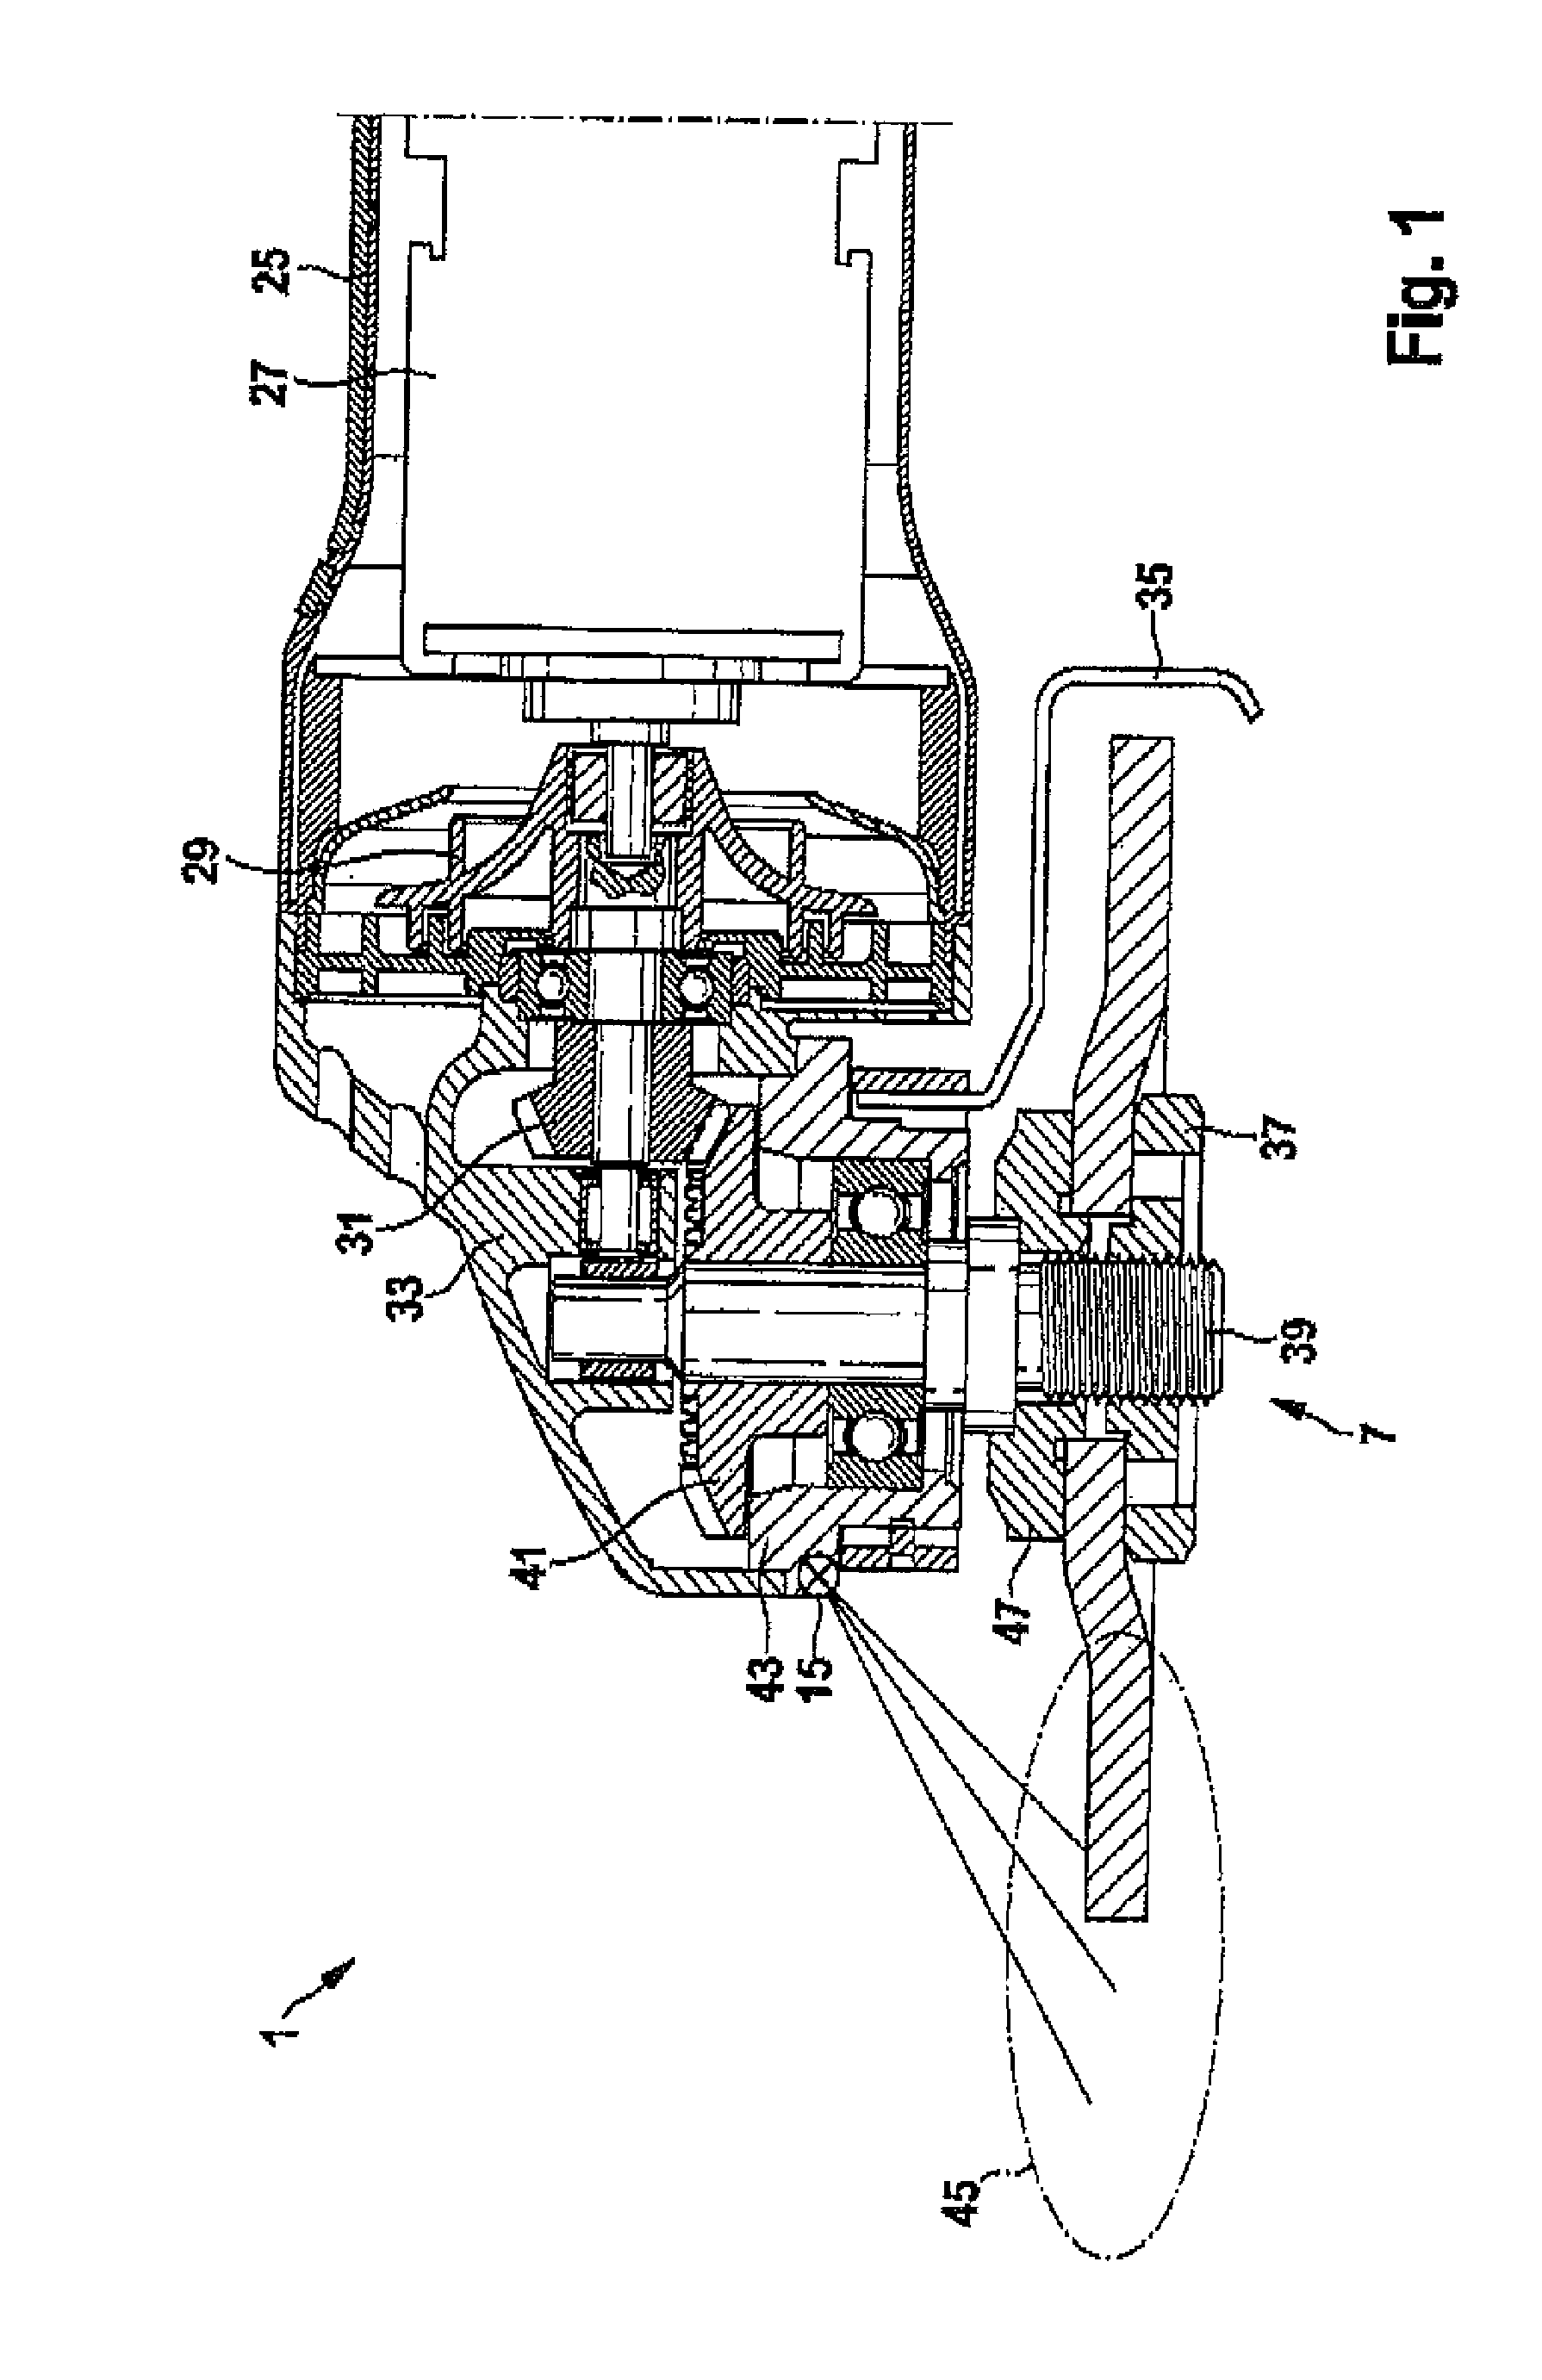 Machine Tool with an Active Electrical Generator for Power Generation